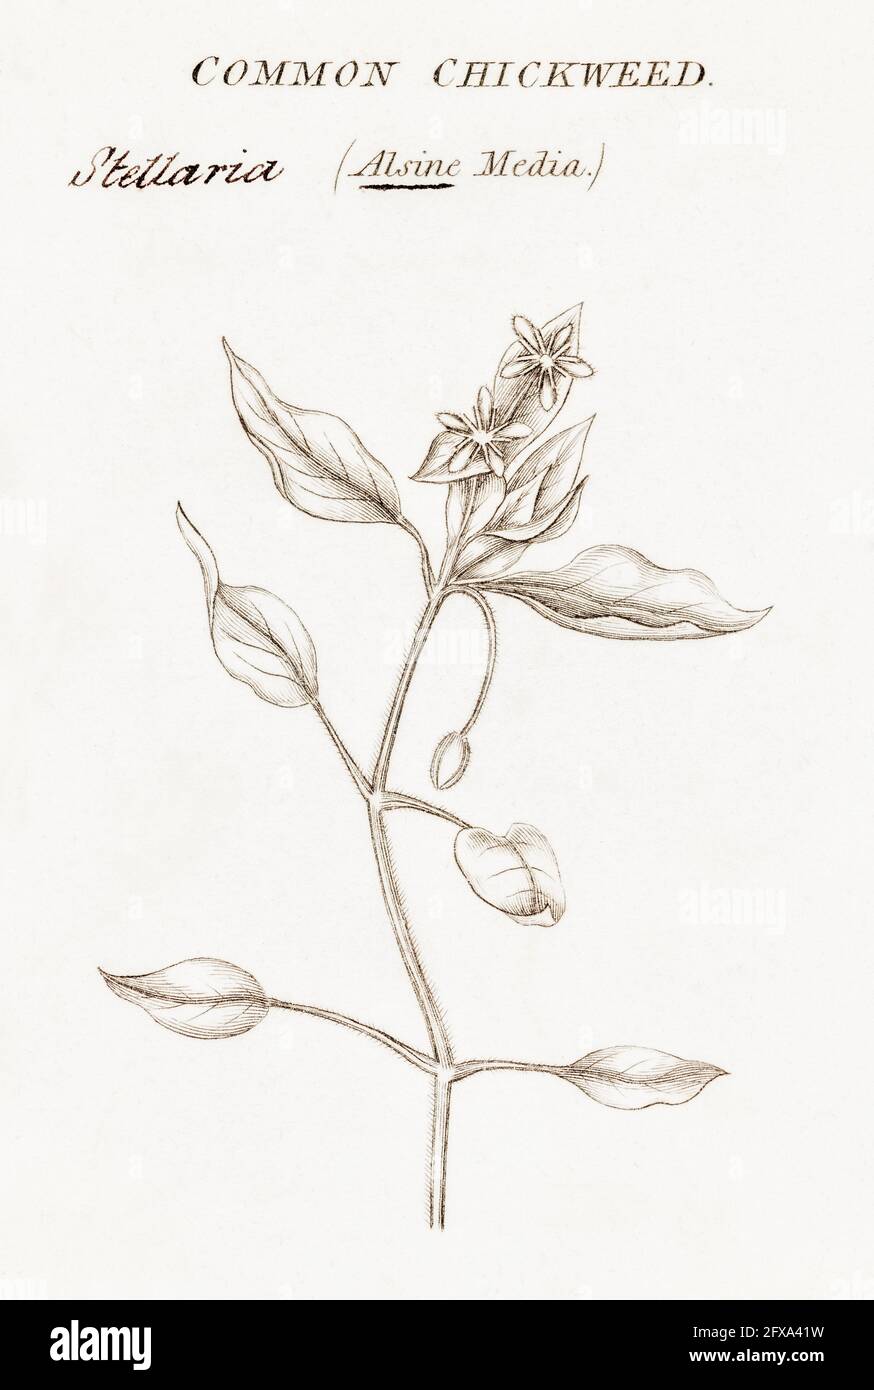 Copperplate botanical illustration of Chickweed / Stellaria media from Robert Thornton's British Flora, 1812. Once used for medicine and also eaten. Stock Photo